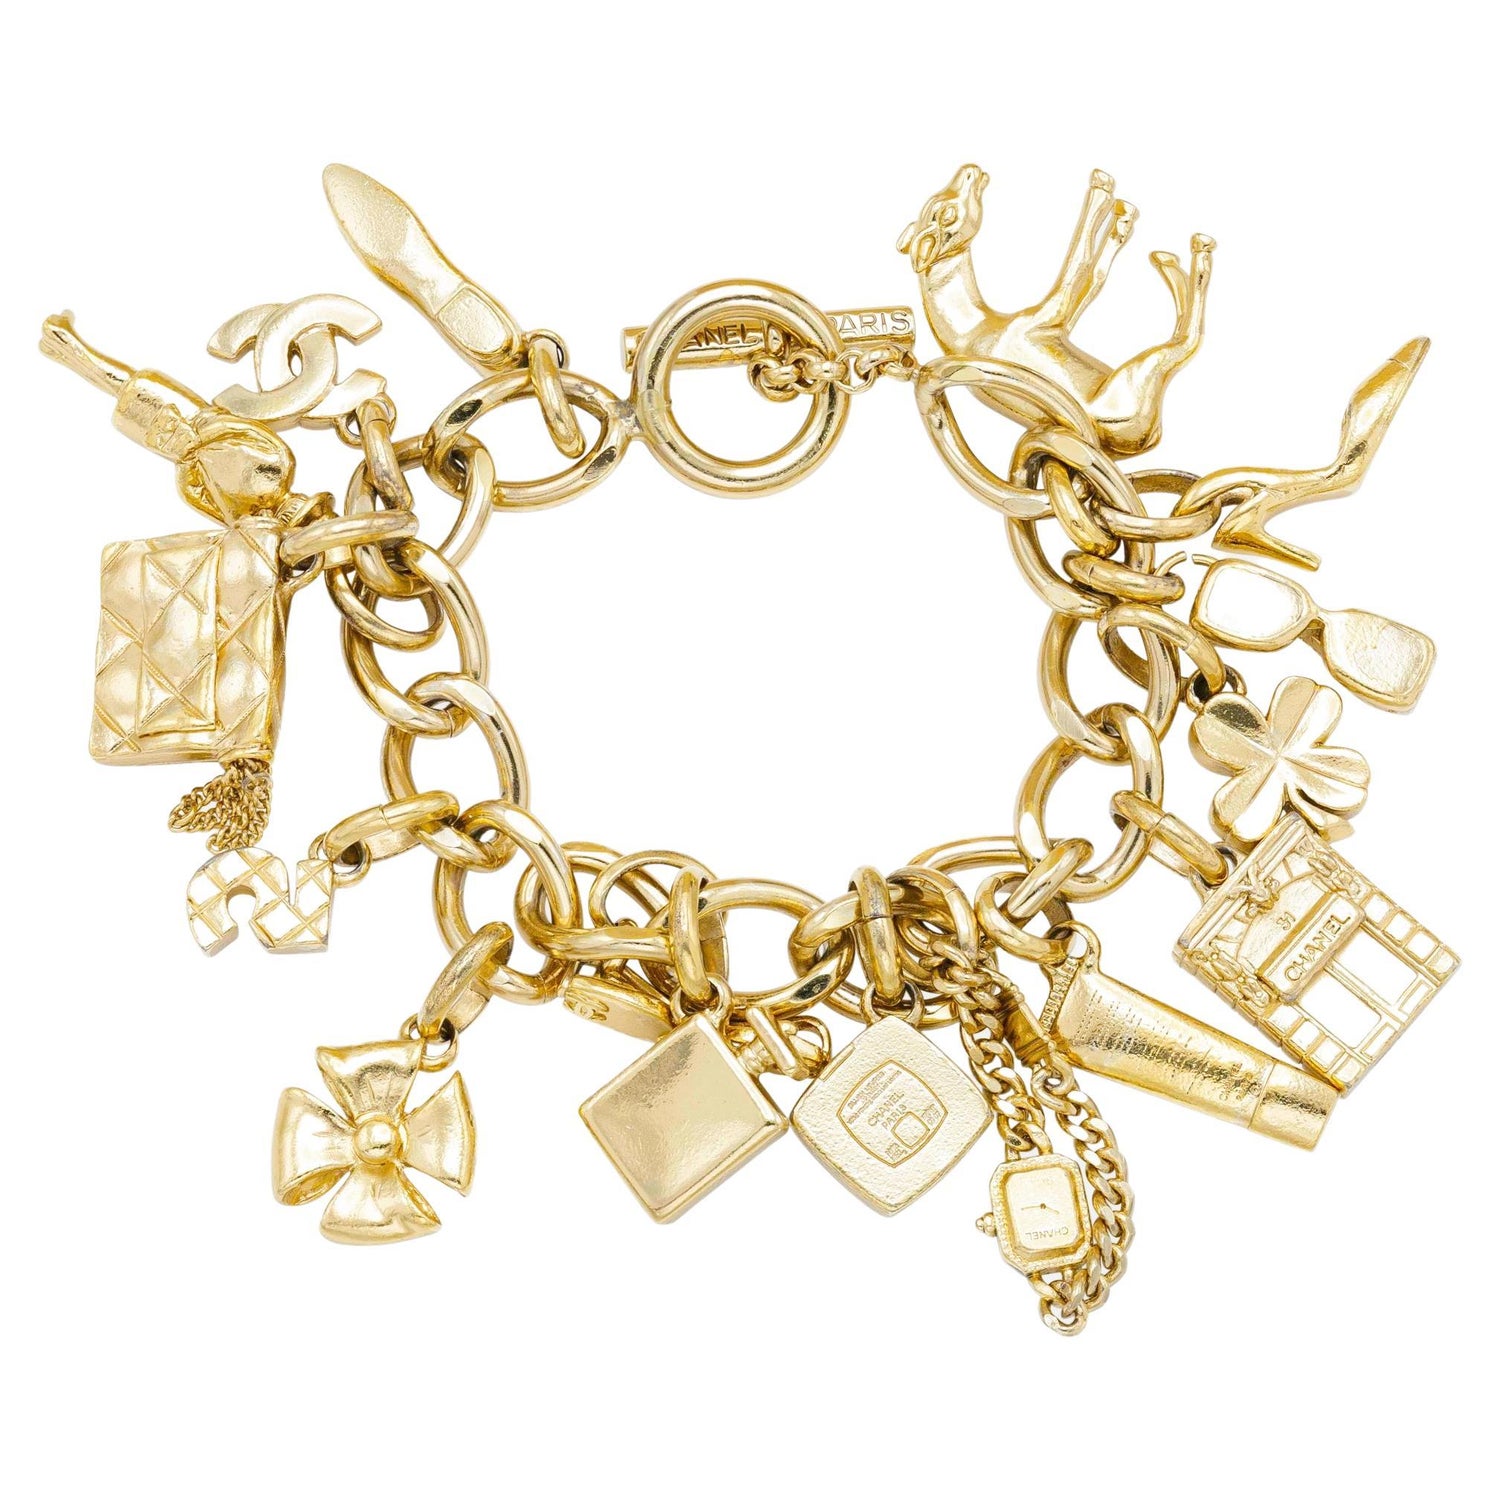 Chanel Faux Pearl, Leather & Strass Charm Bracelet - Burgundy, Gold-Plated  Charm, Bracelets - CHA938882